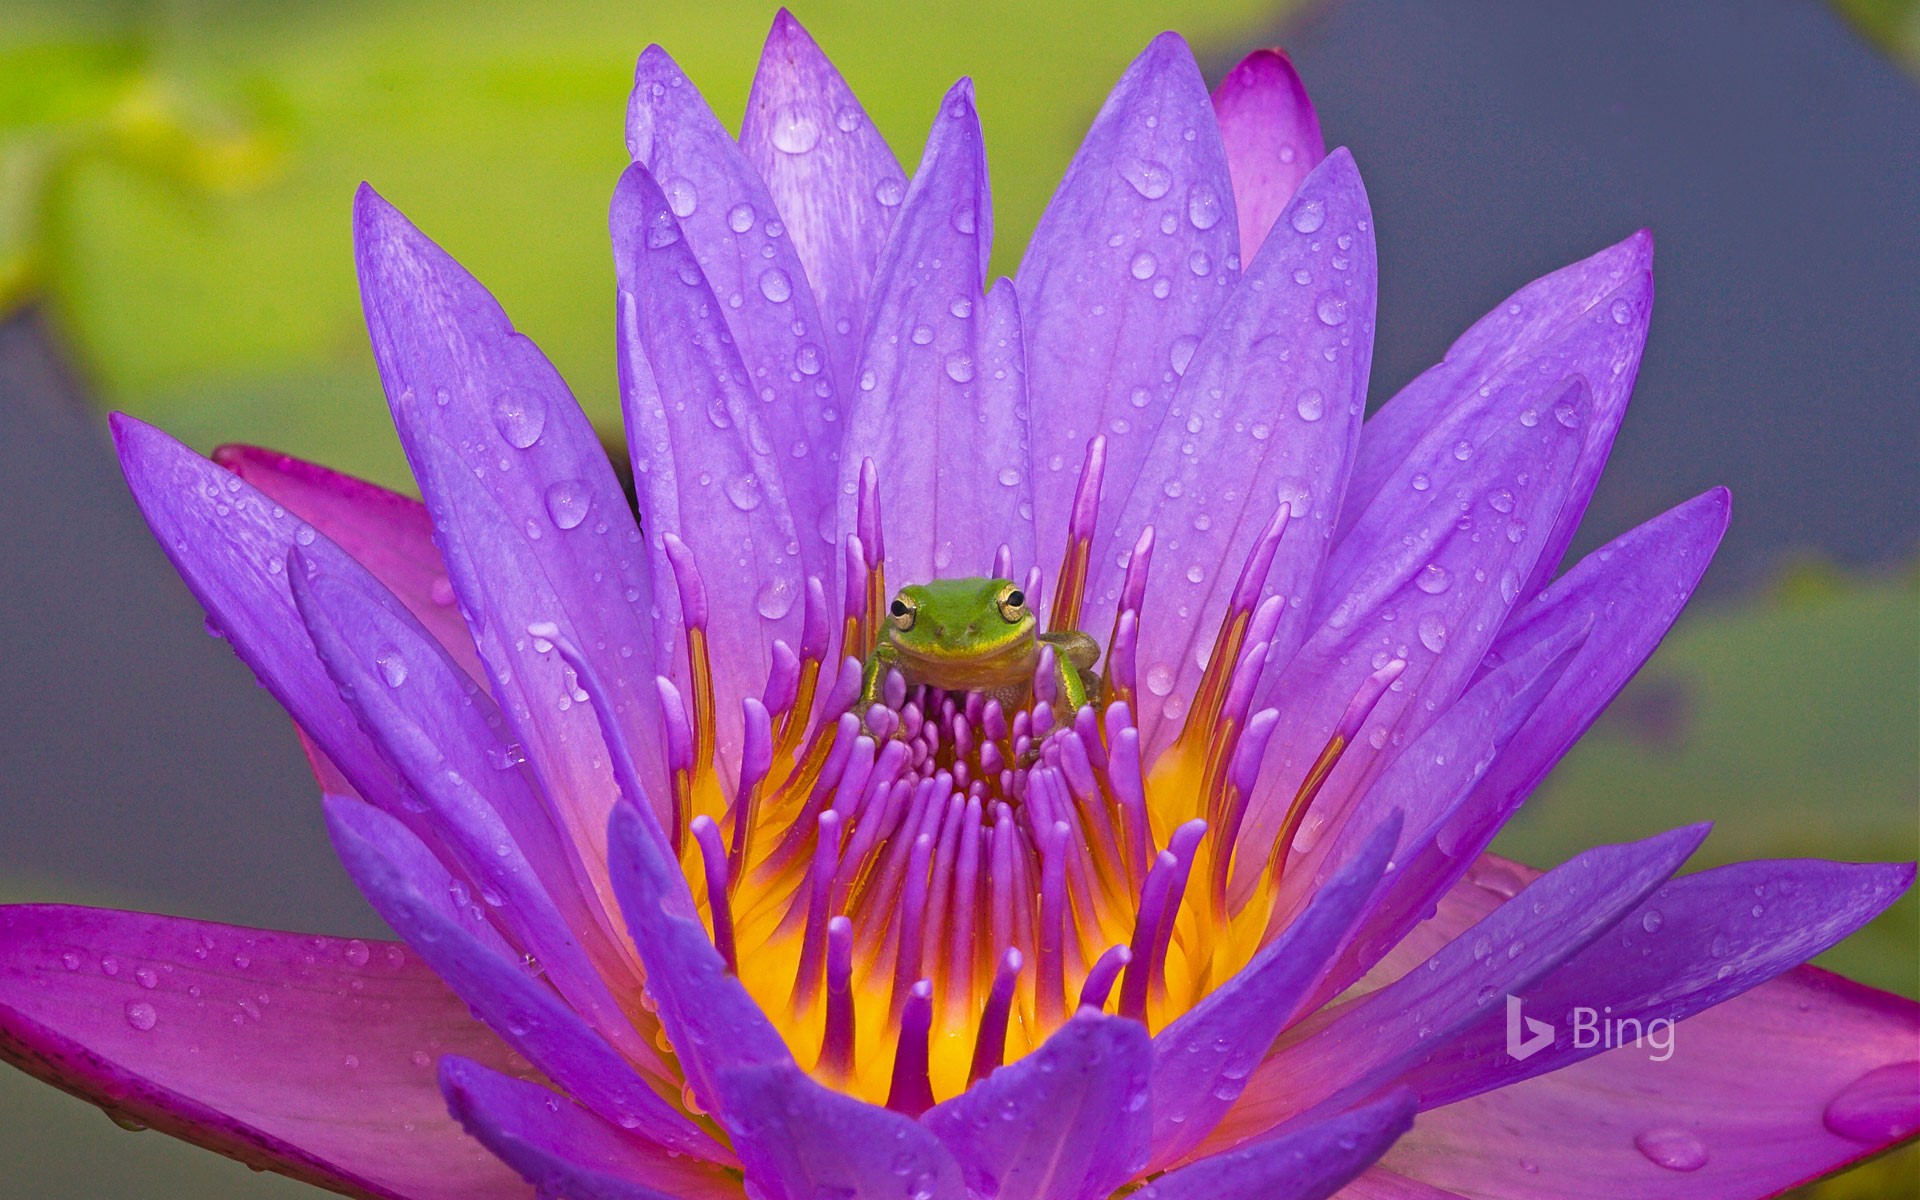 Green tree frog and water lily, Lake Kissimmee, Florida